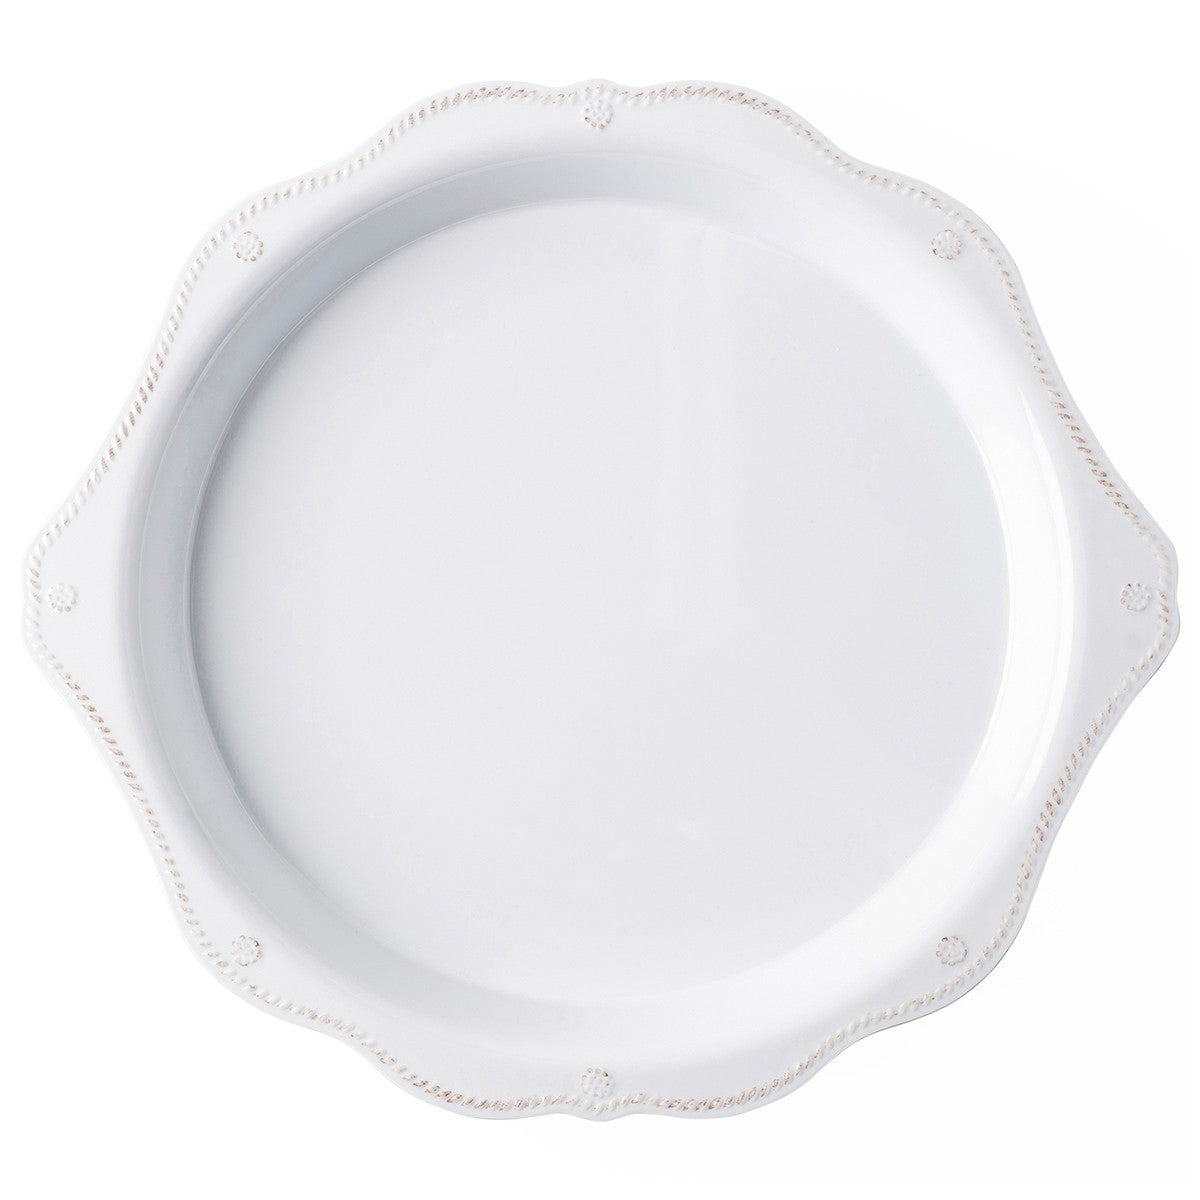 berry and thread large melamine round platter on a white background